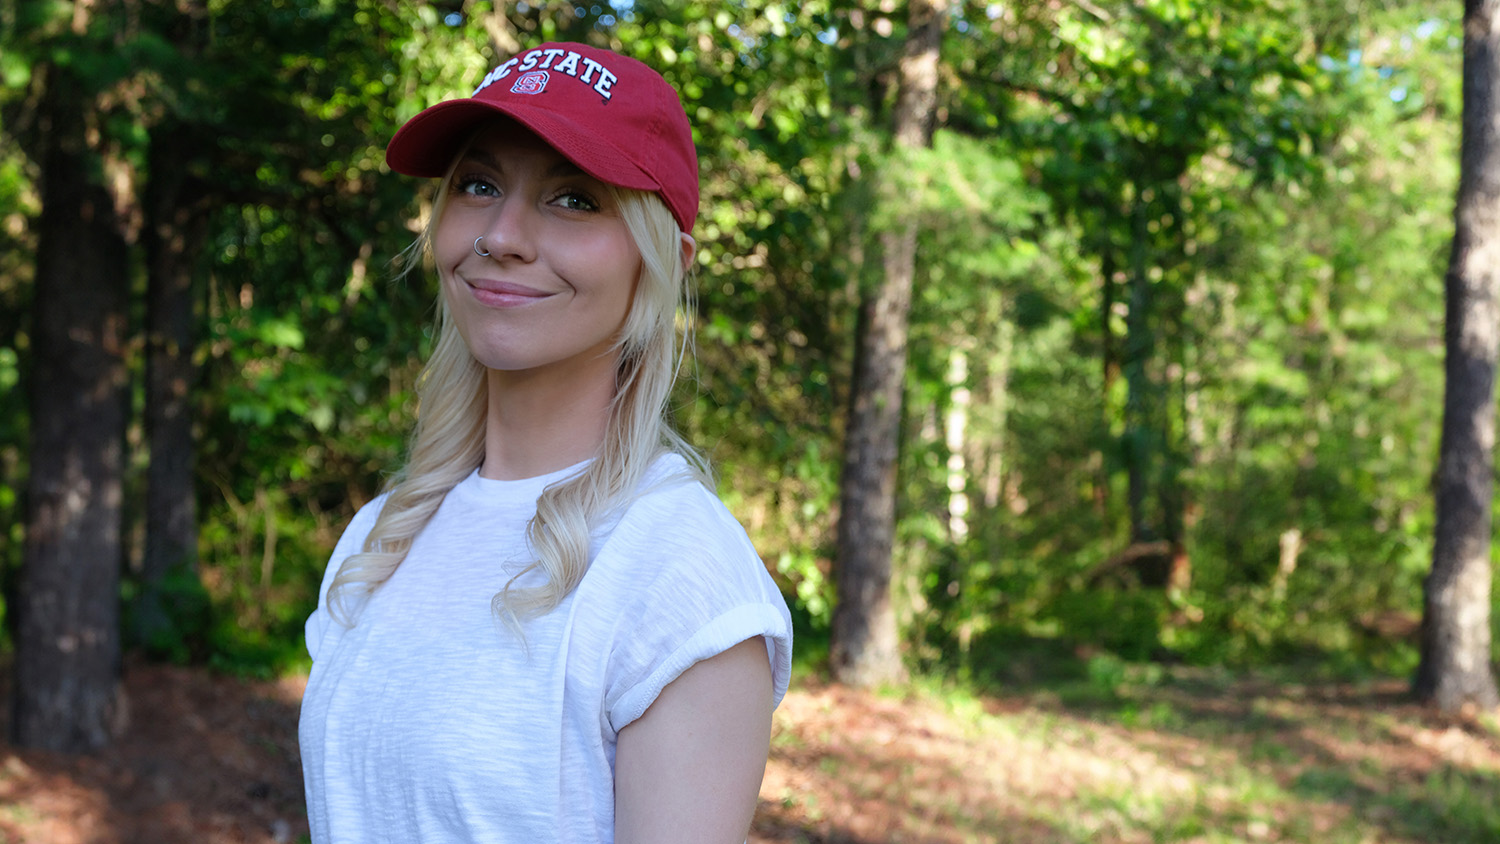 a woman wearing a red hat and white shirt stands in front of some trees